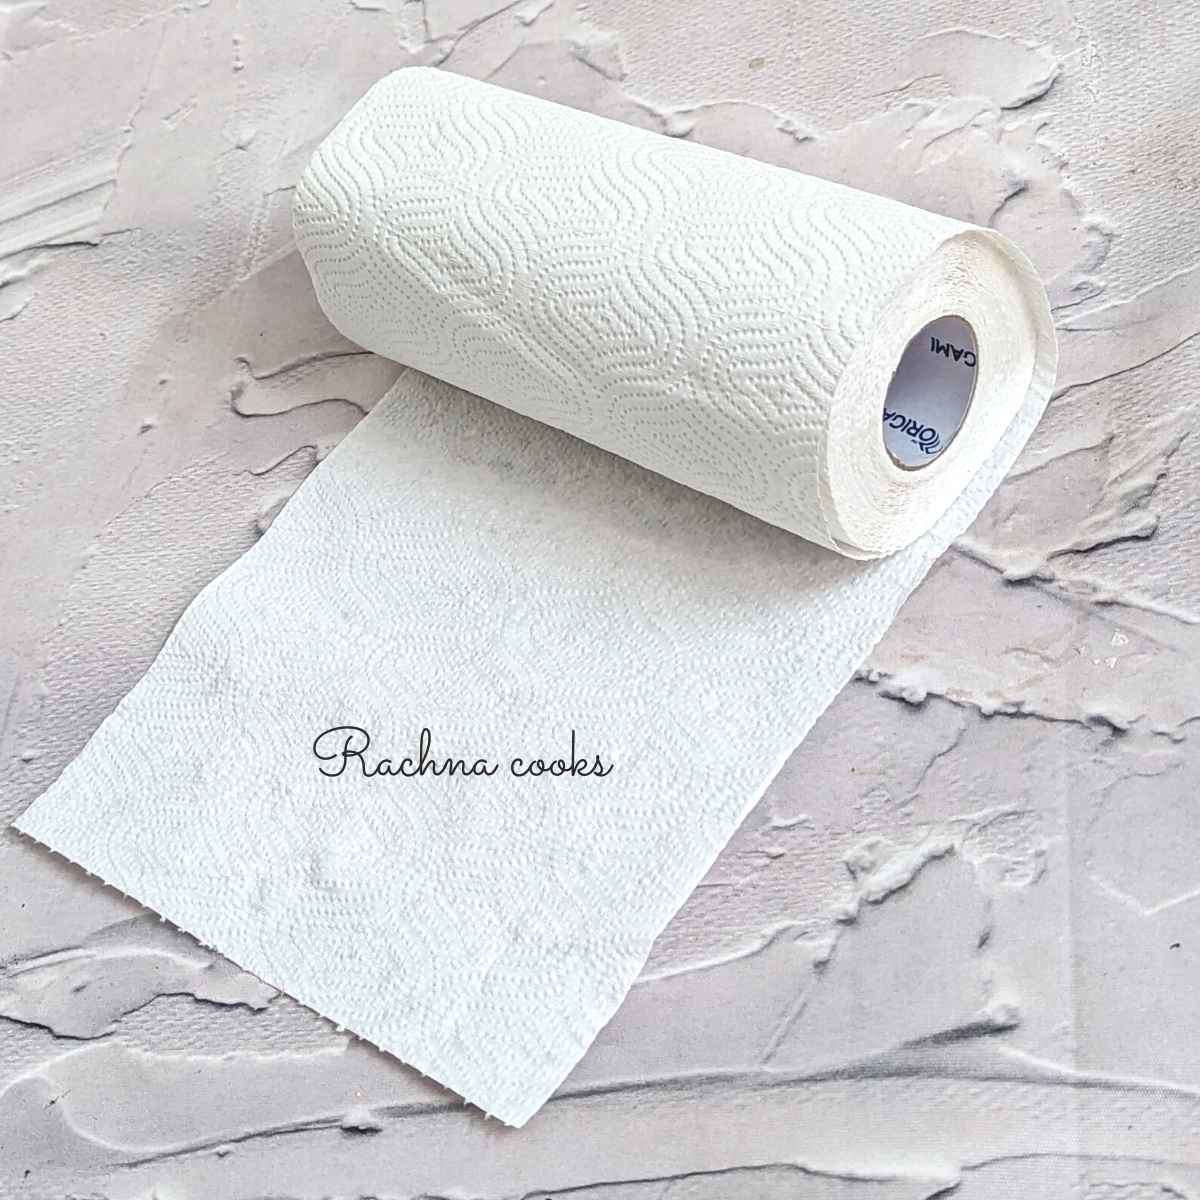 A paper towel roll on a surface